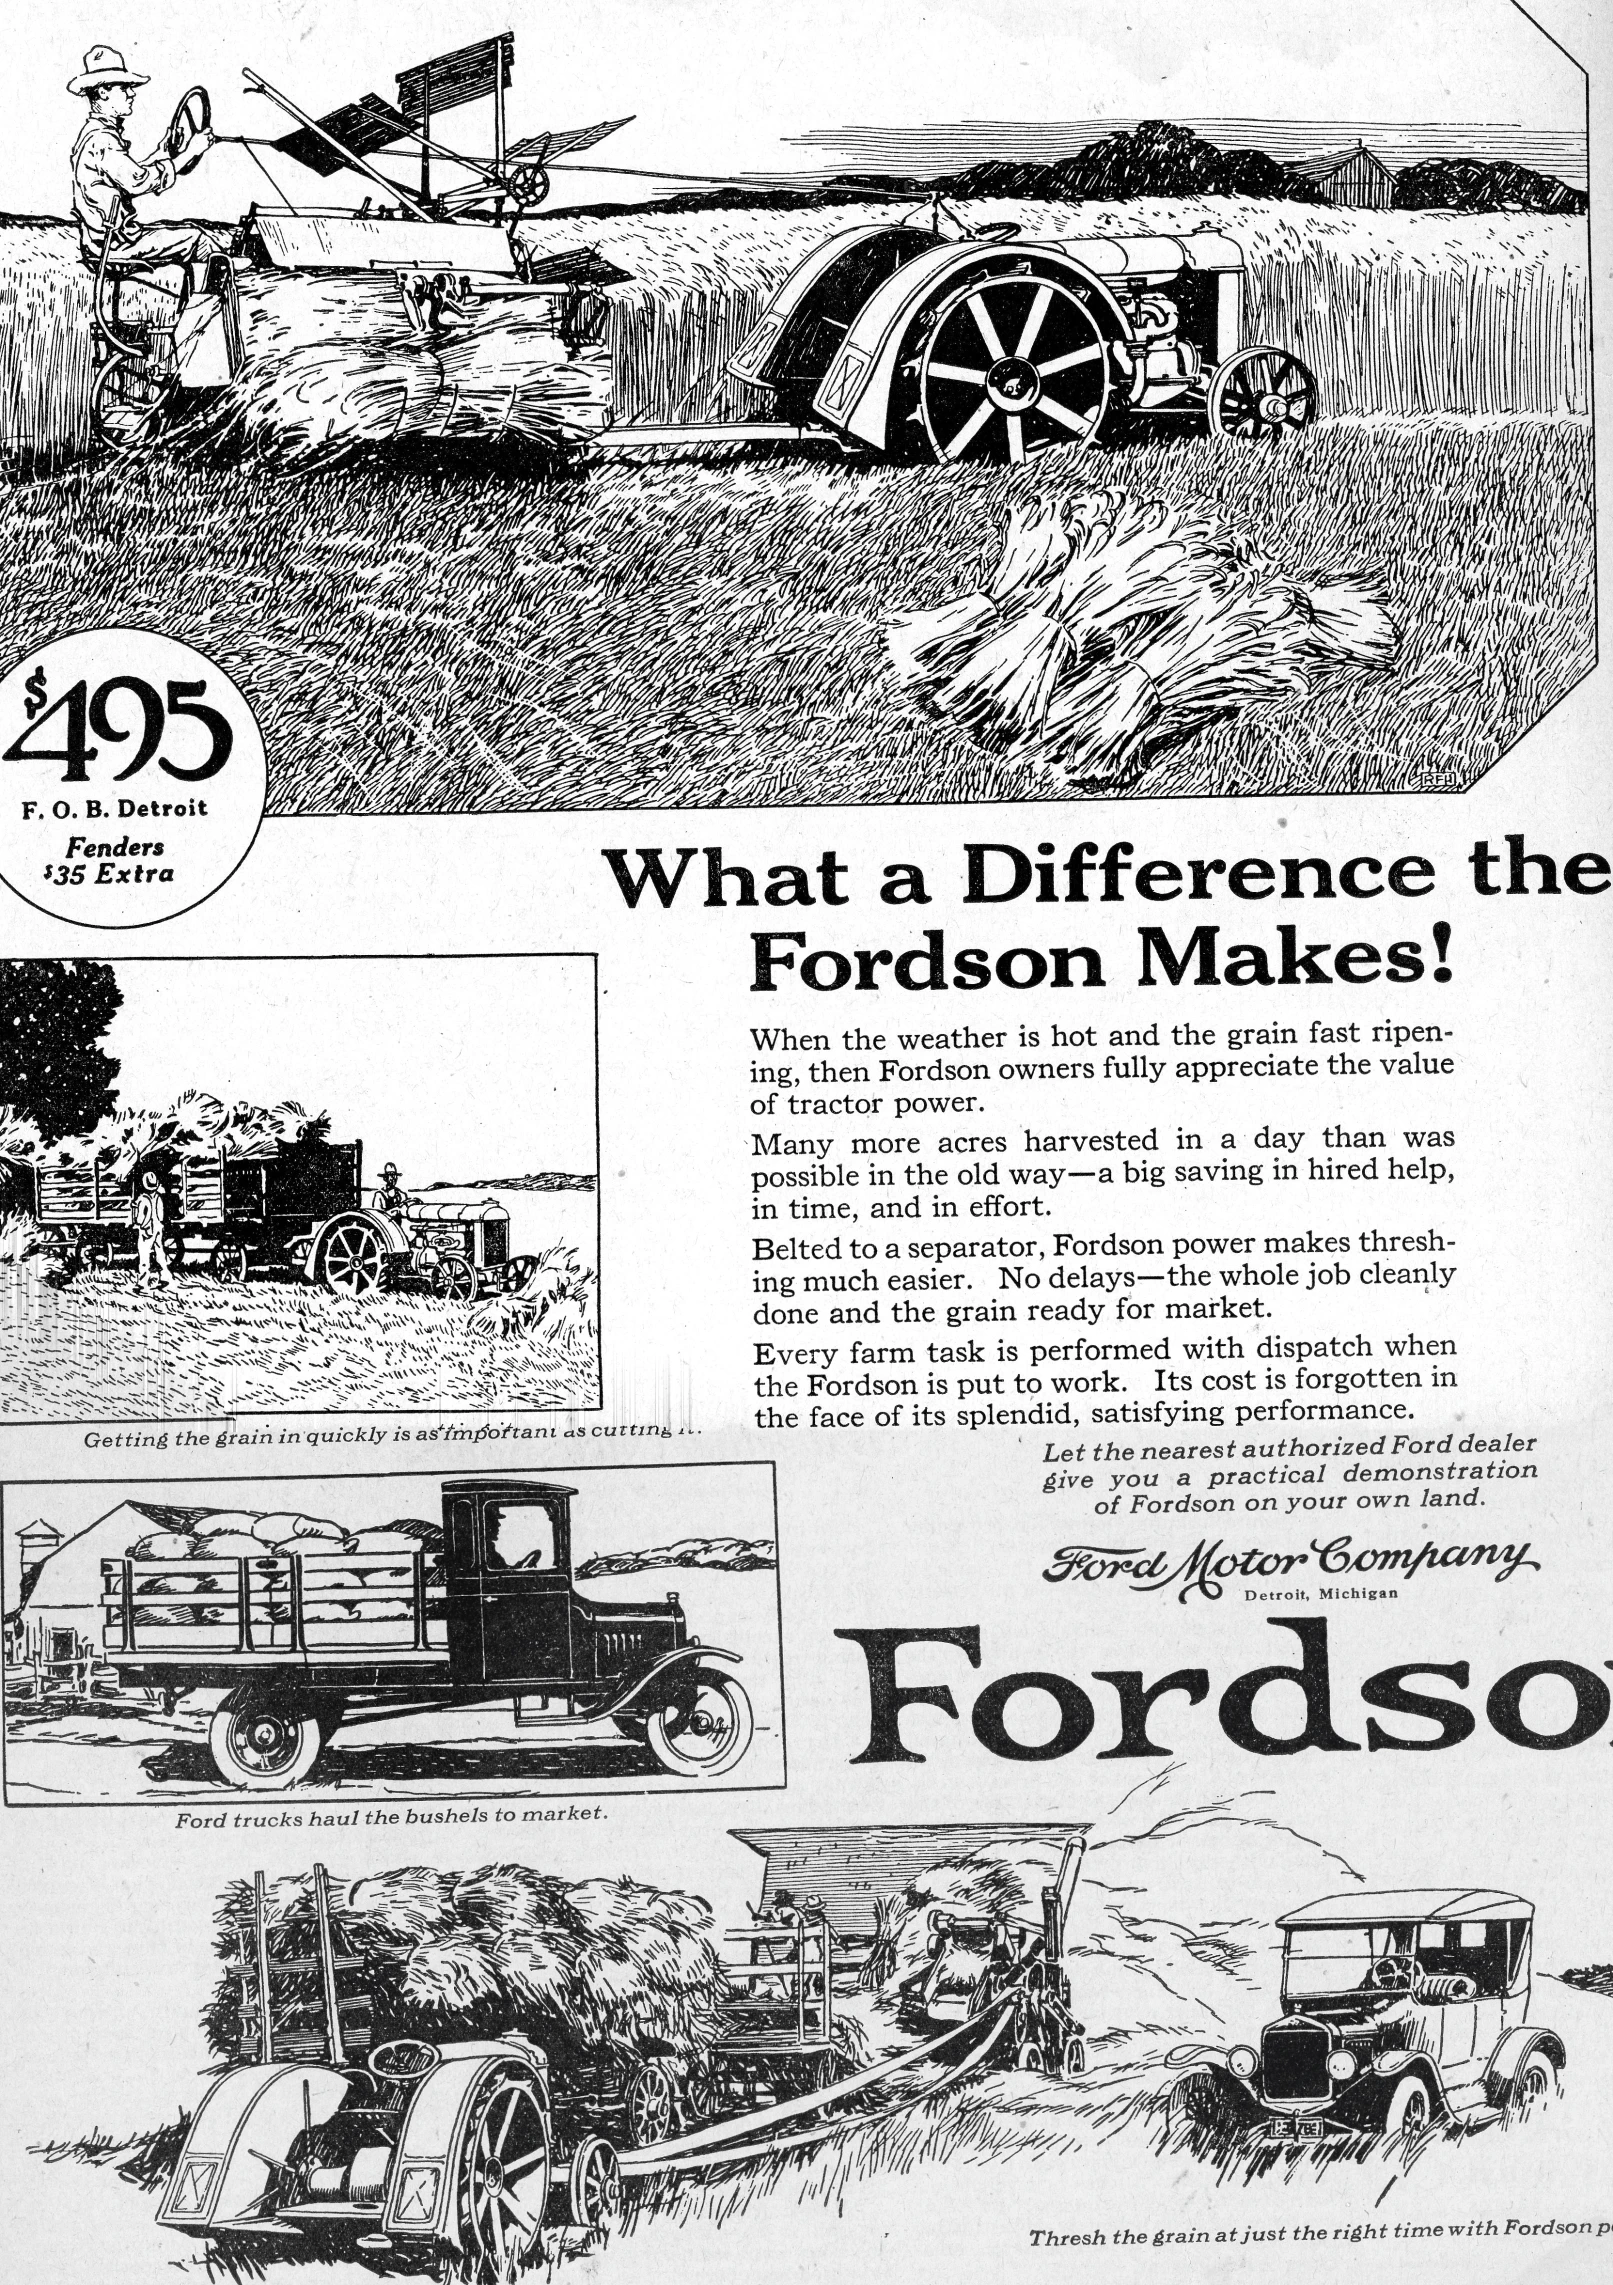 an old advertit for ford vehicles, including trucks and trucks